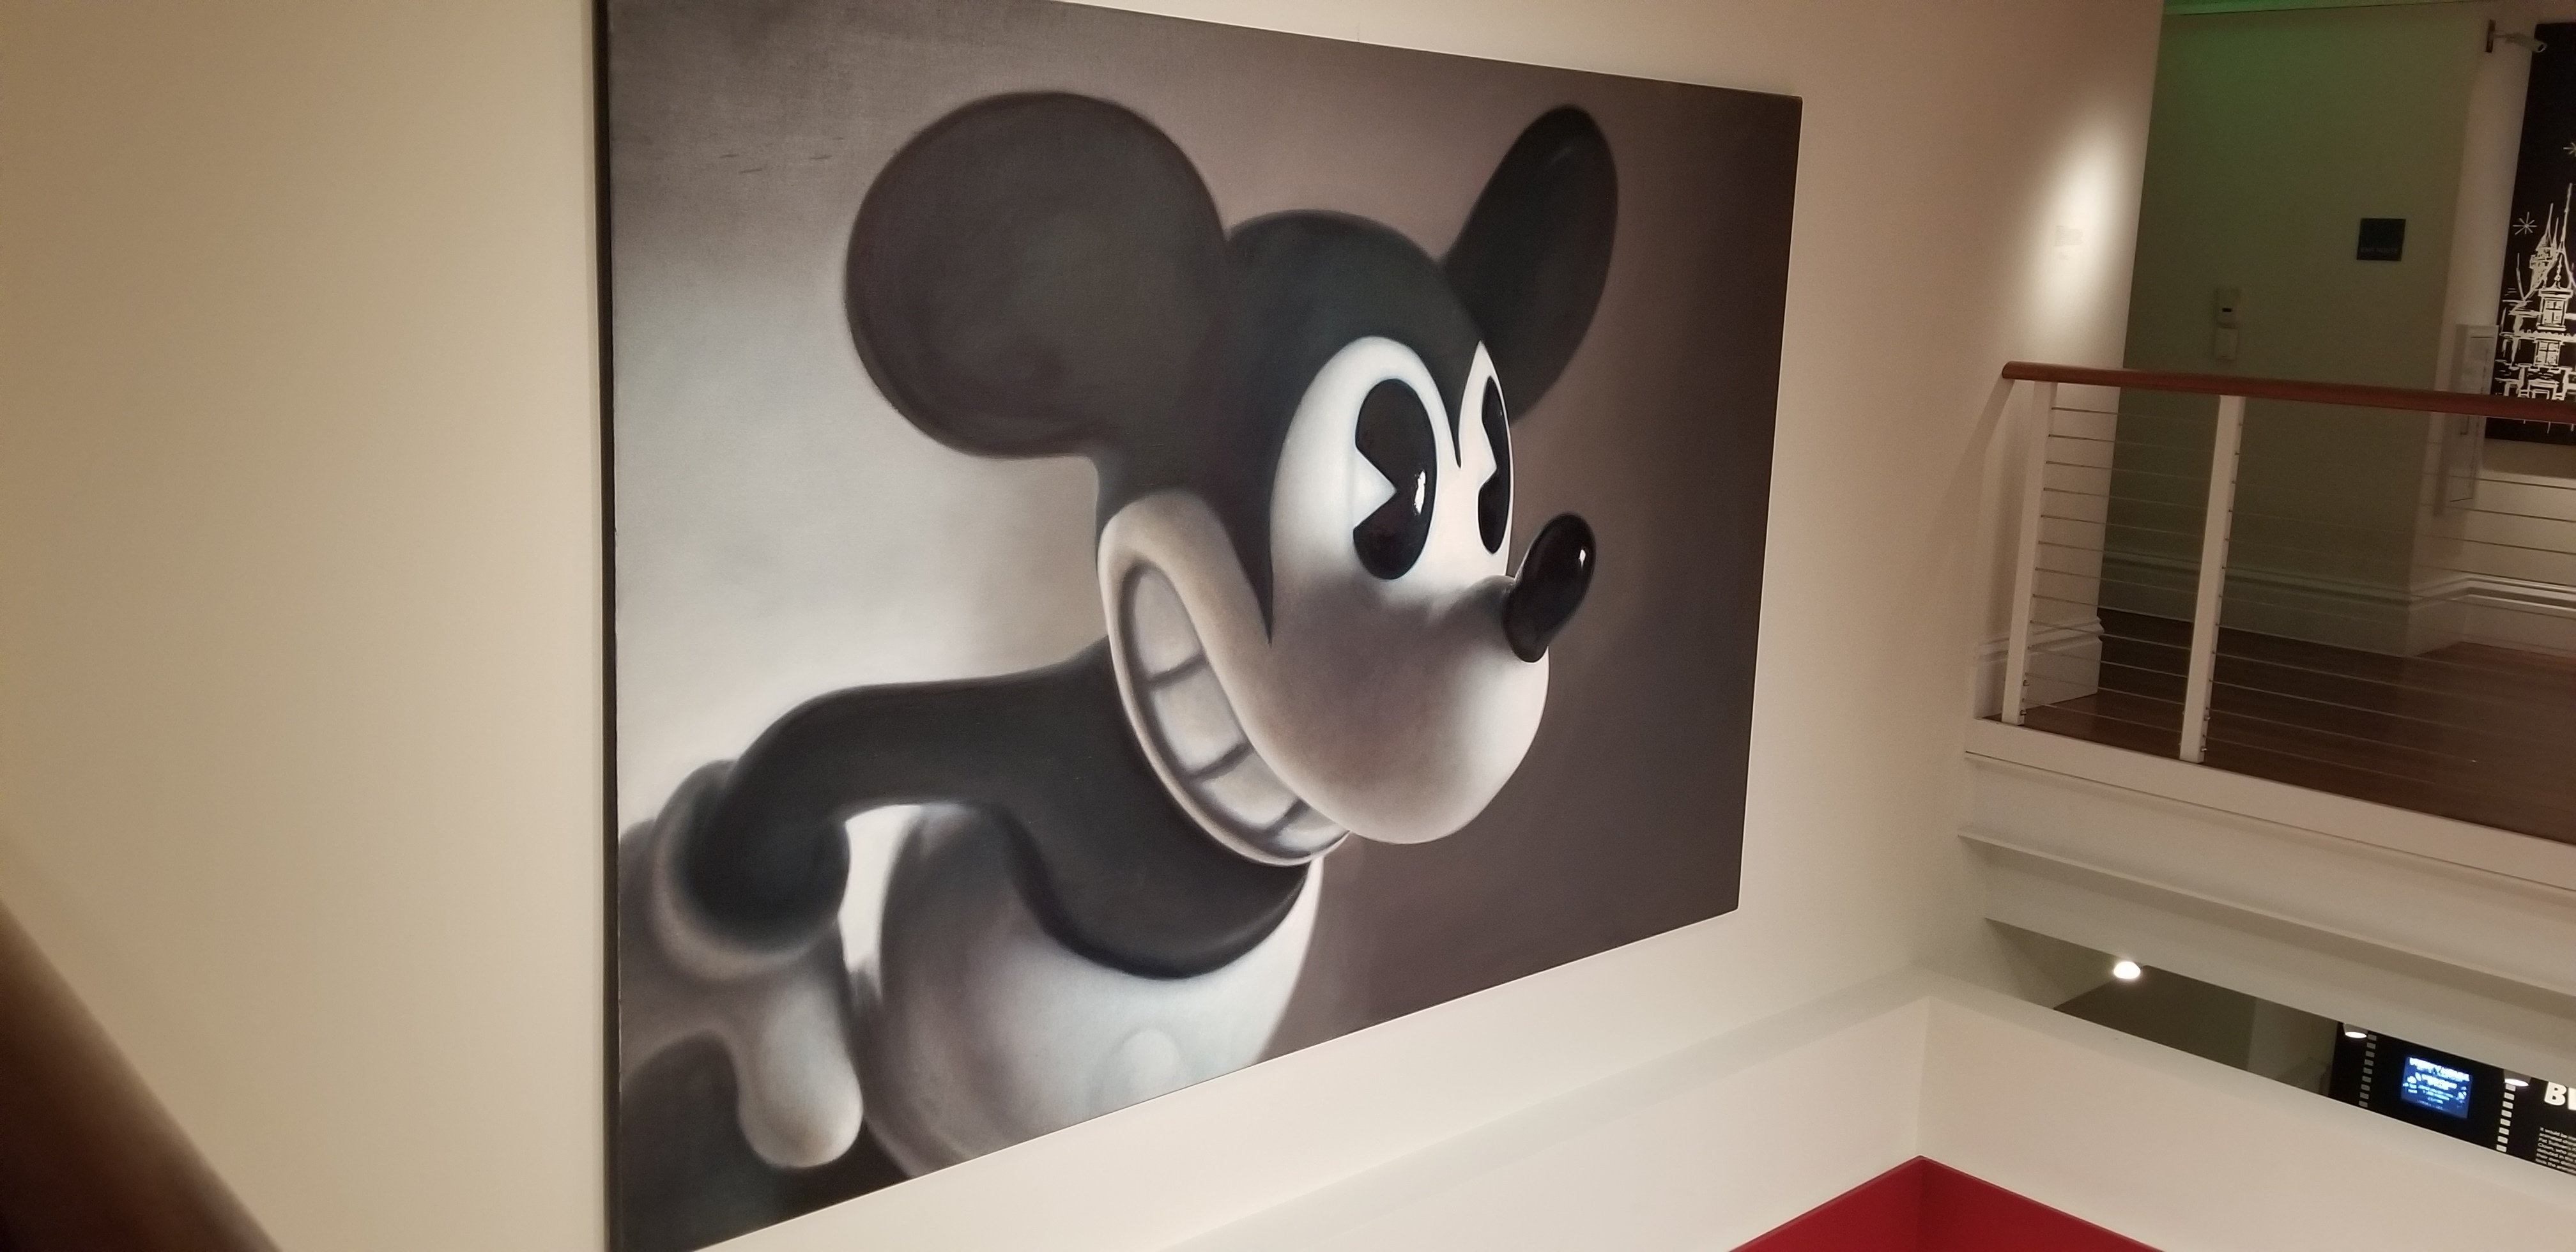 Mickey Mouse: from Walt to the World at the Disney Family Museum